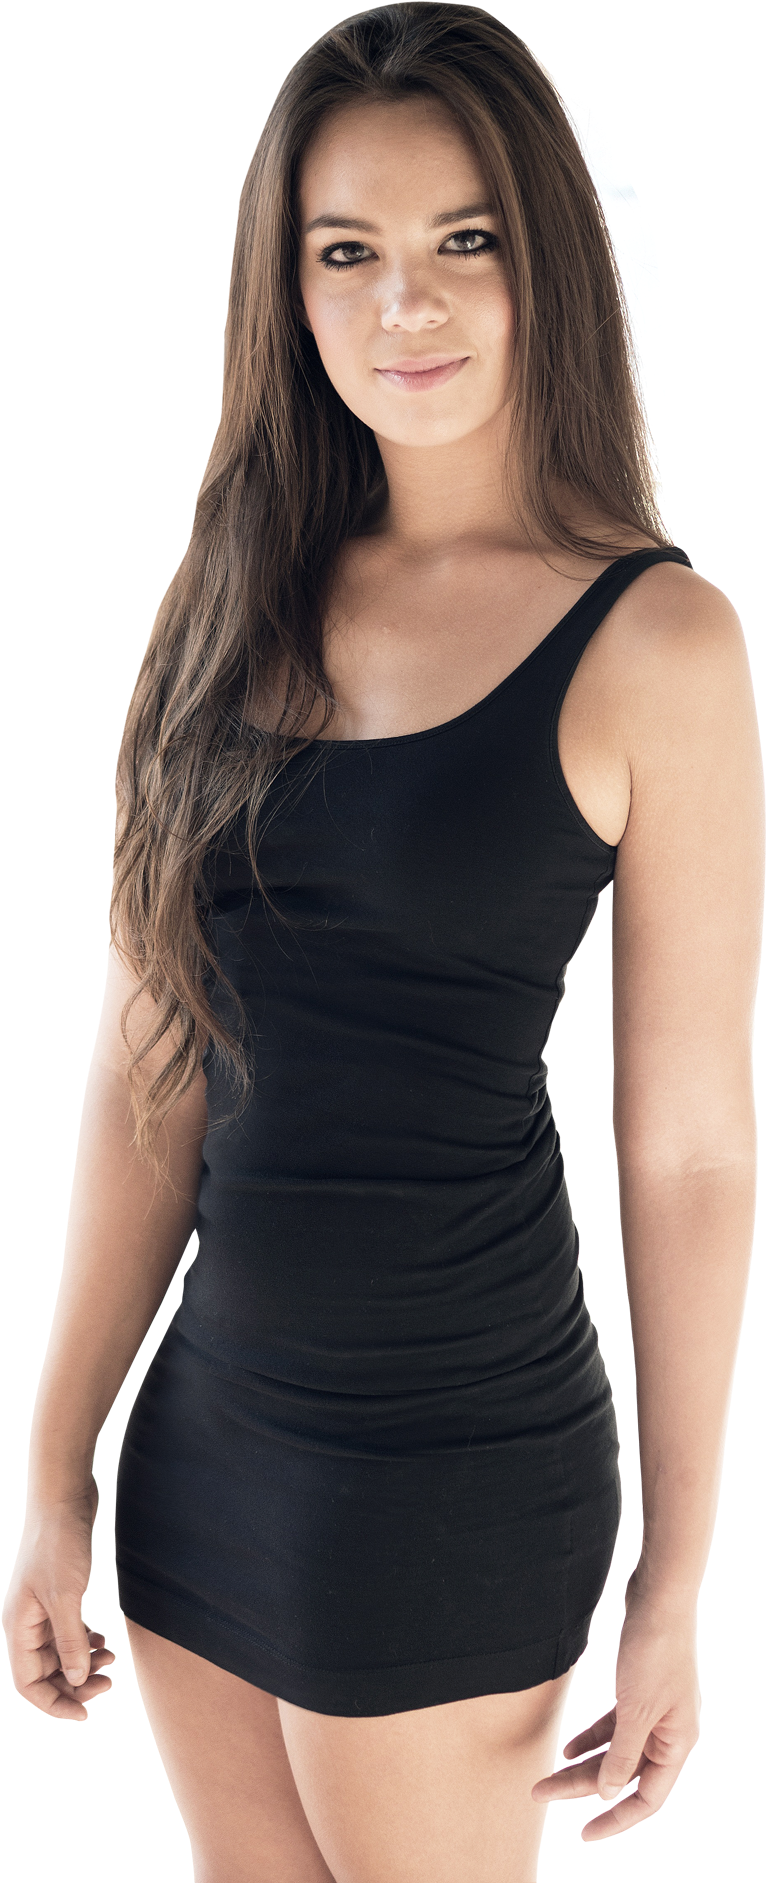 Attractive Woman Png, Transparent Png